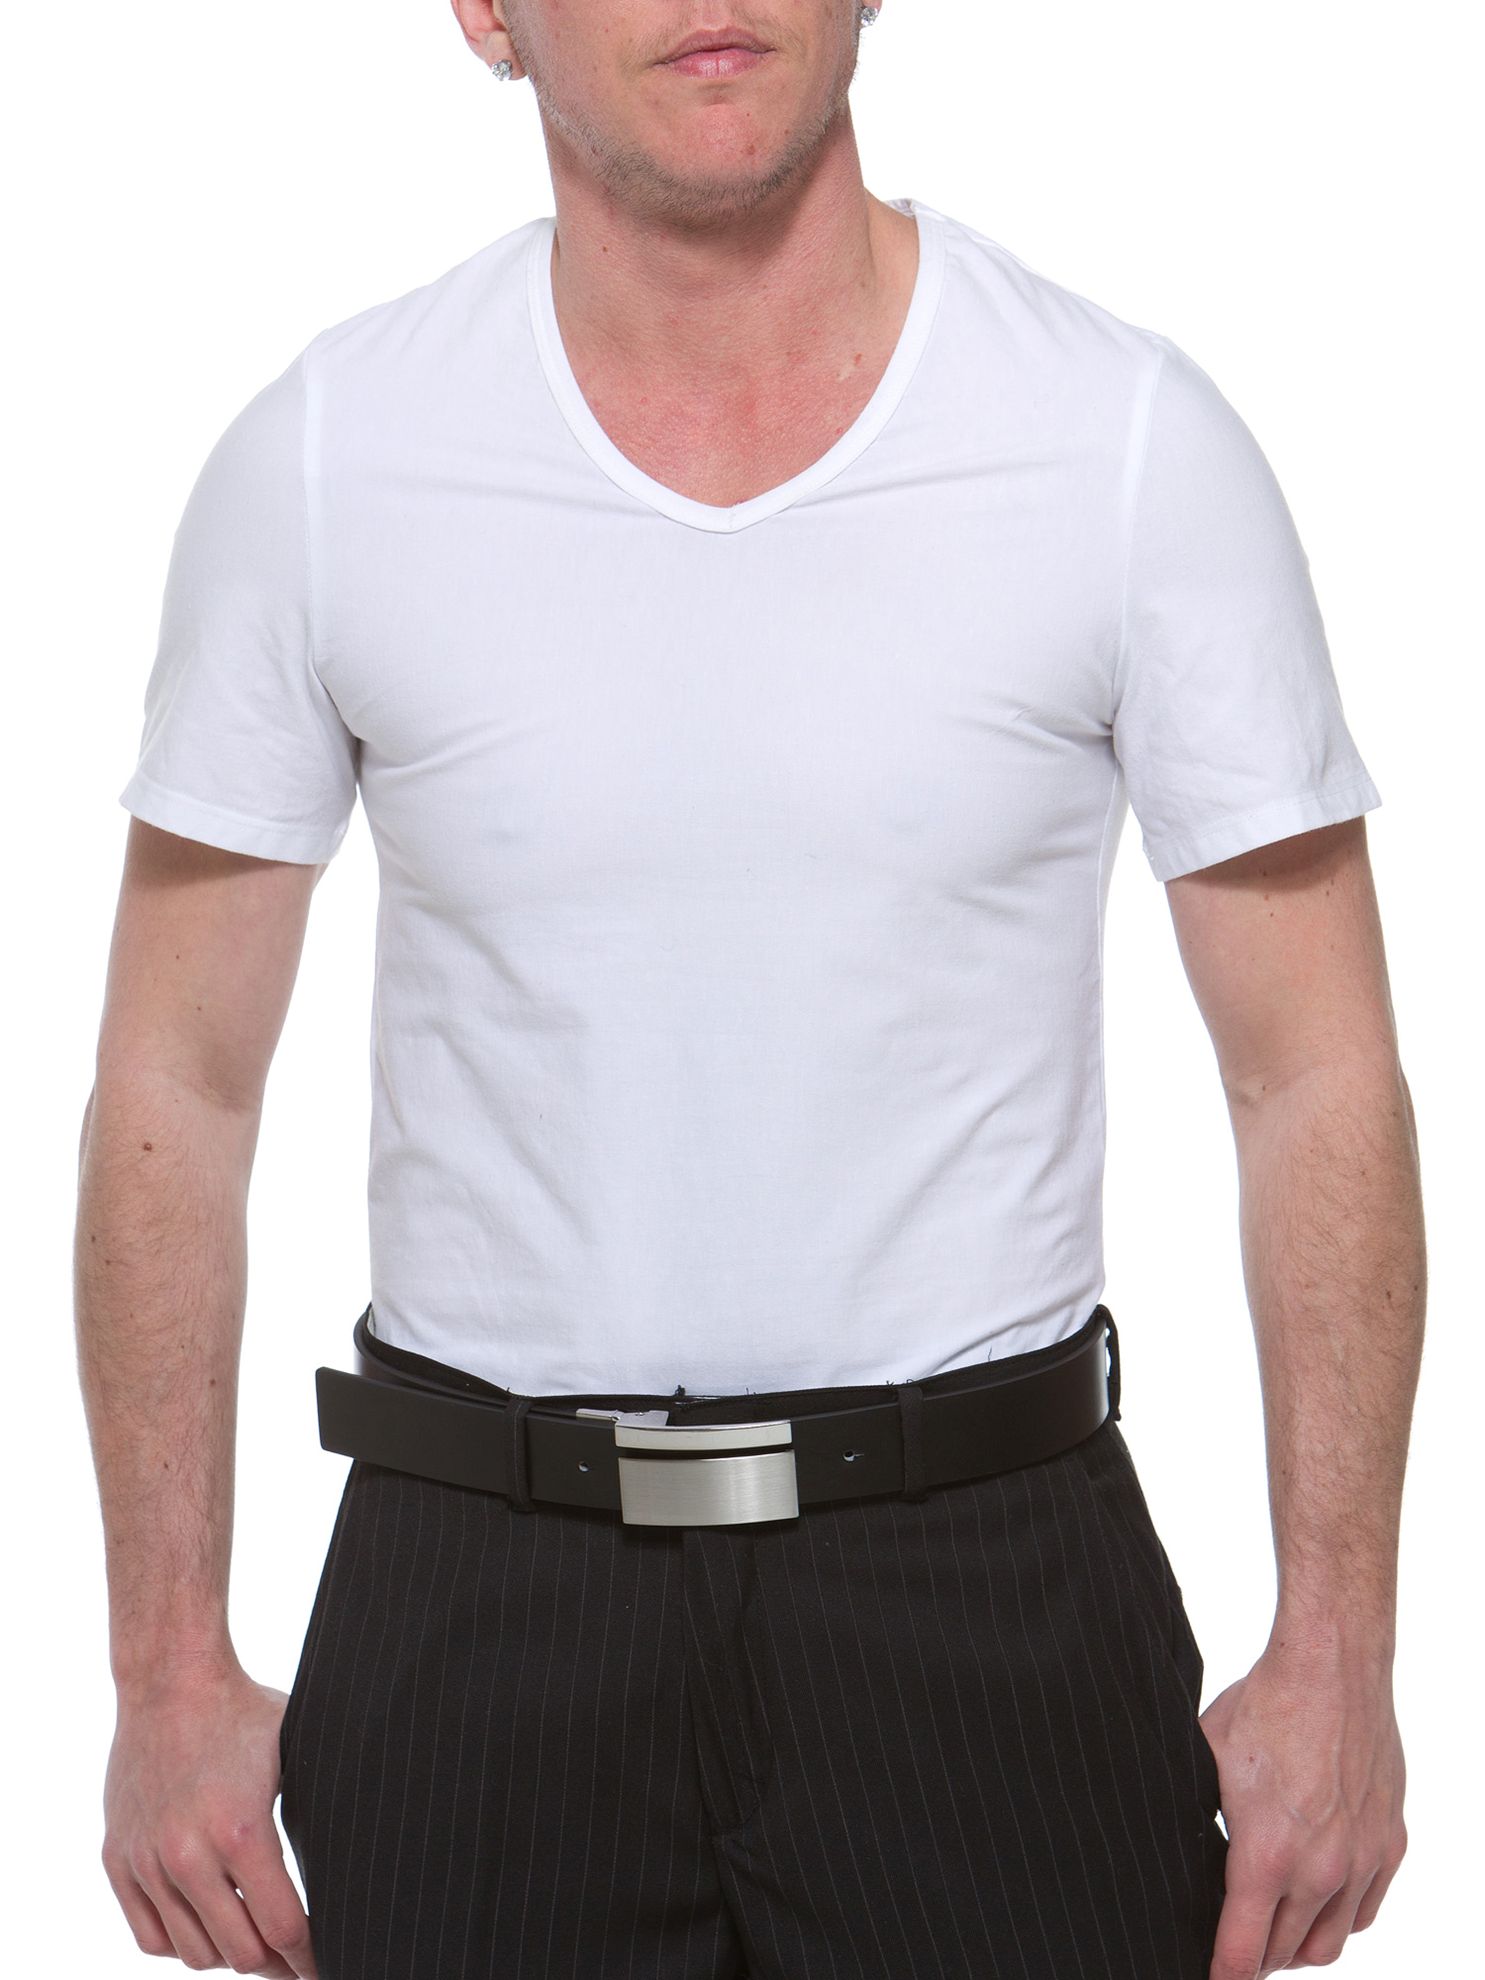 MagiCotton V-Neck Compression Shirt. FTM Chest Binders for Trans